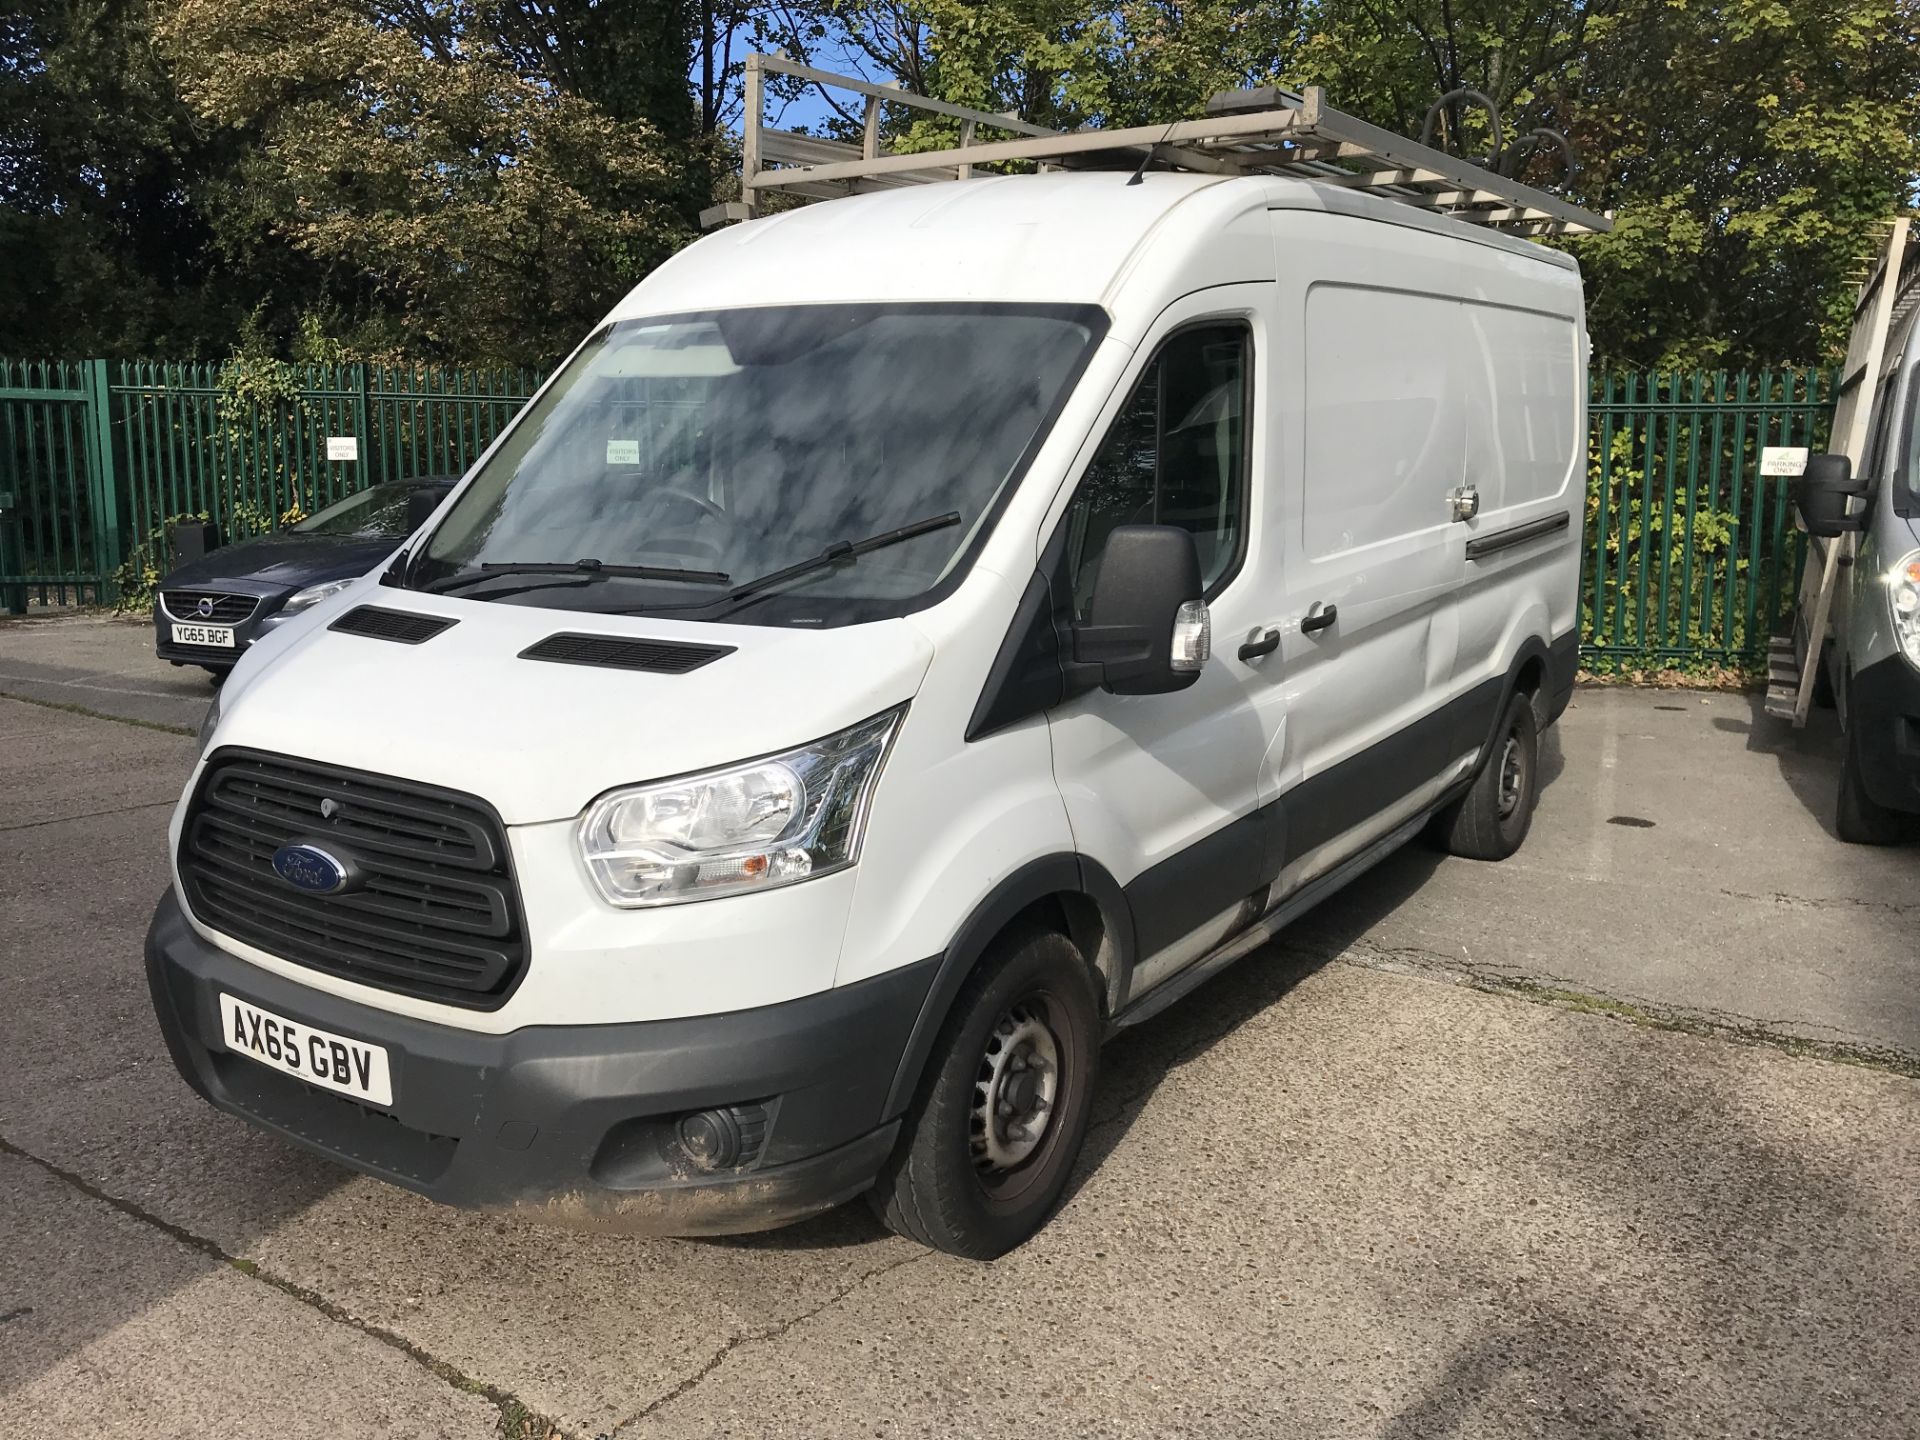 Ford Transit 350 2.2 TDCi 125ps VAN, with fitted glass rack, registration no. AX65 GBV, date first - Image 2 of 7